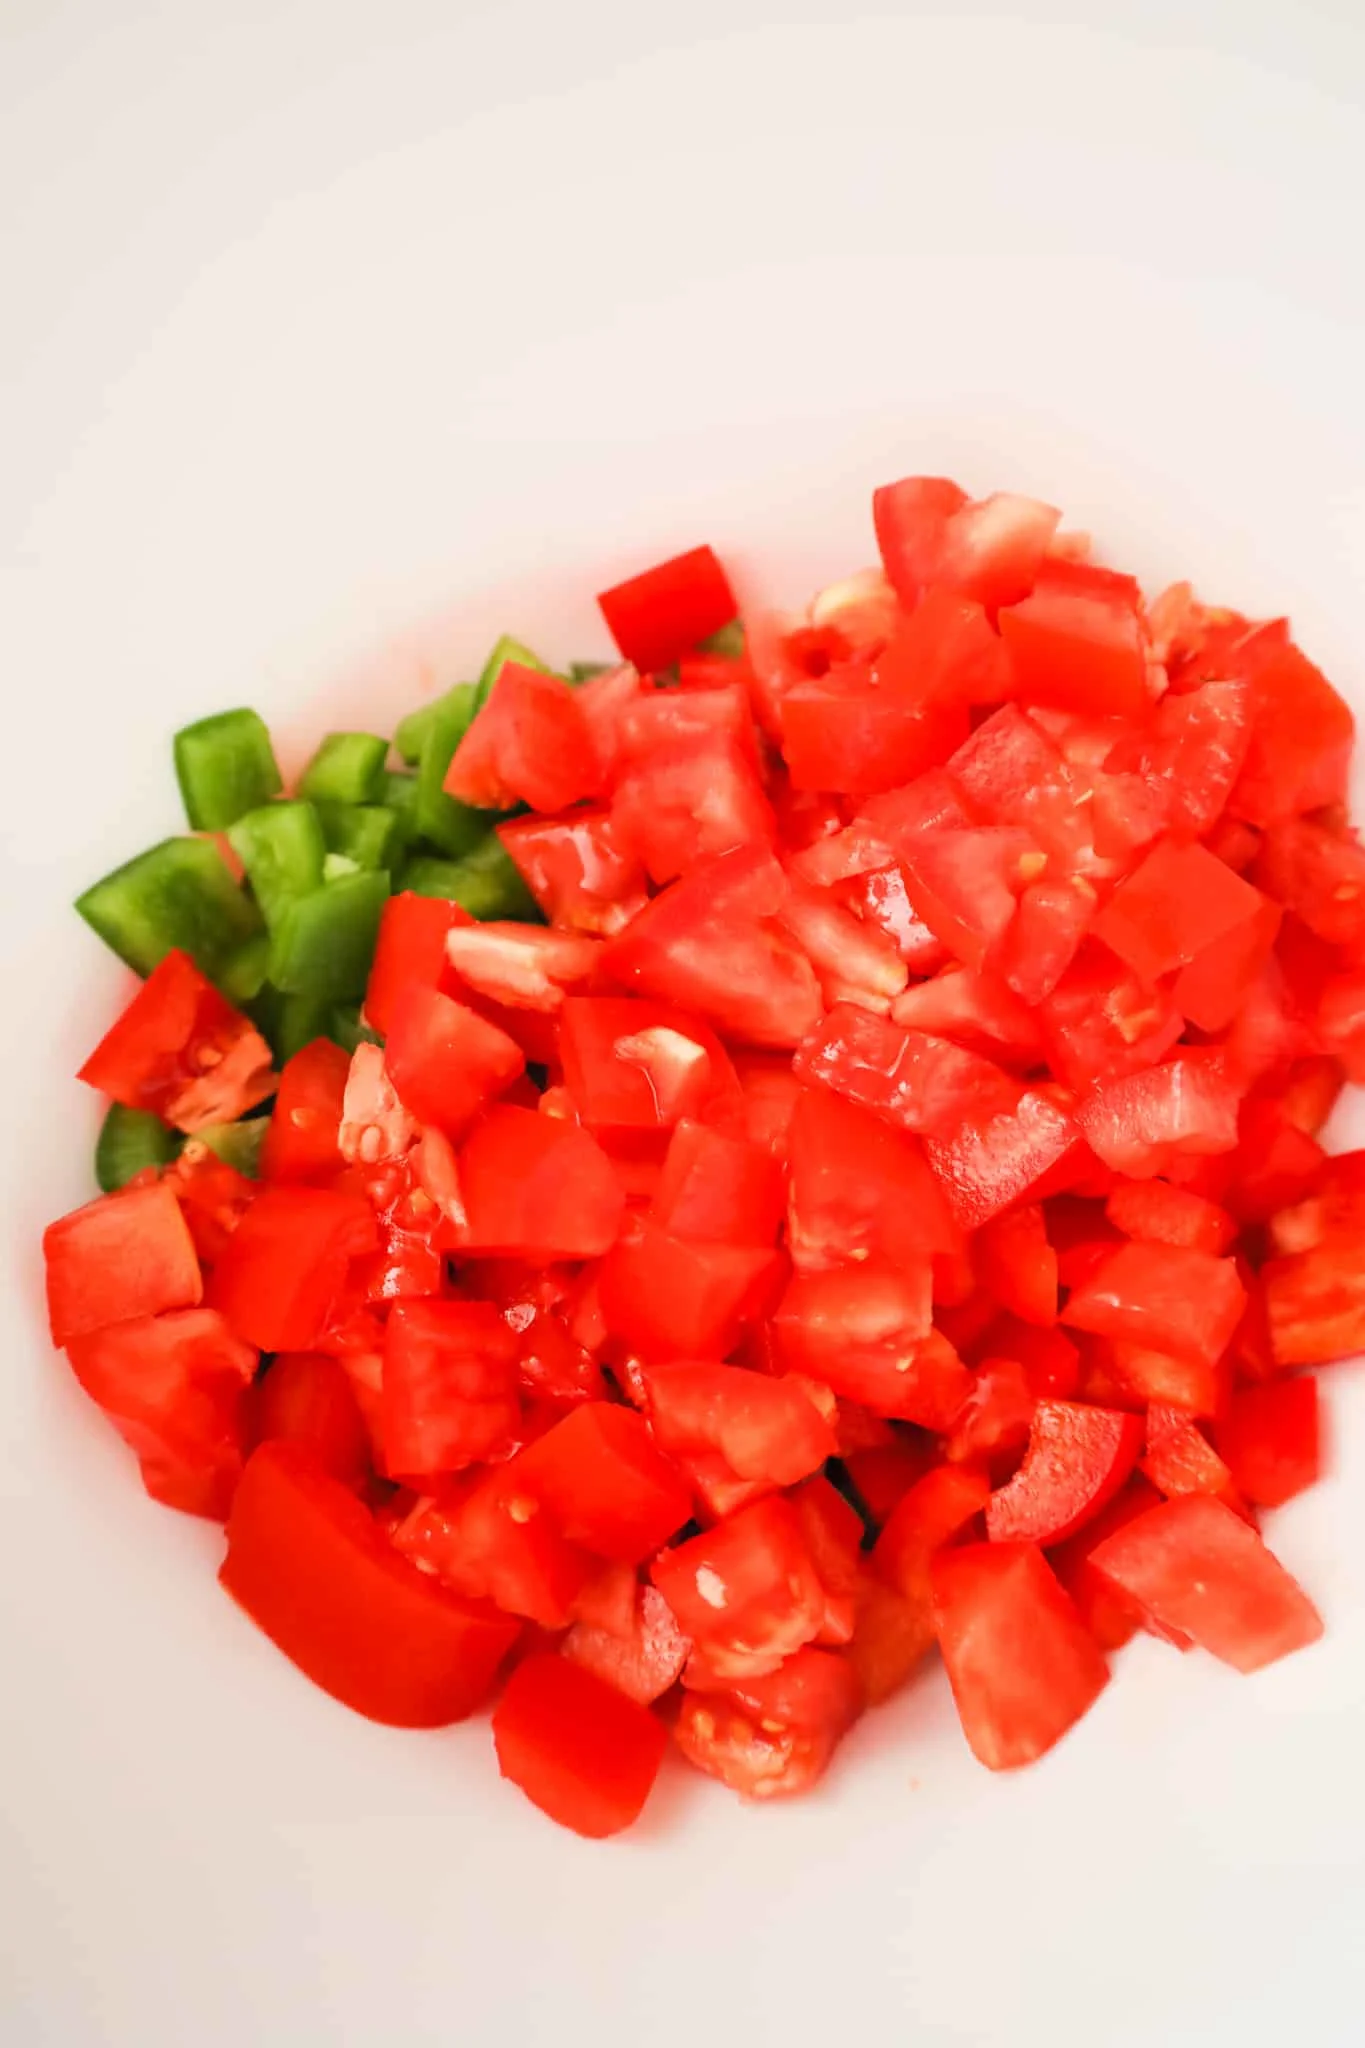 diced tomatoes and diced peppers in a mixing bowl